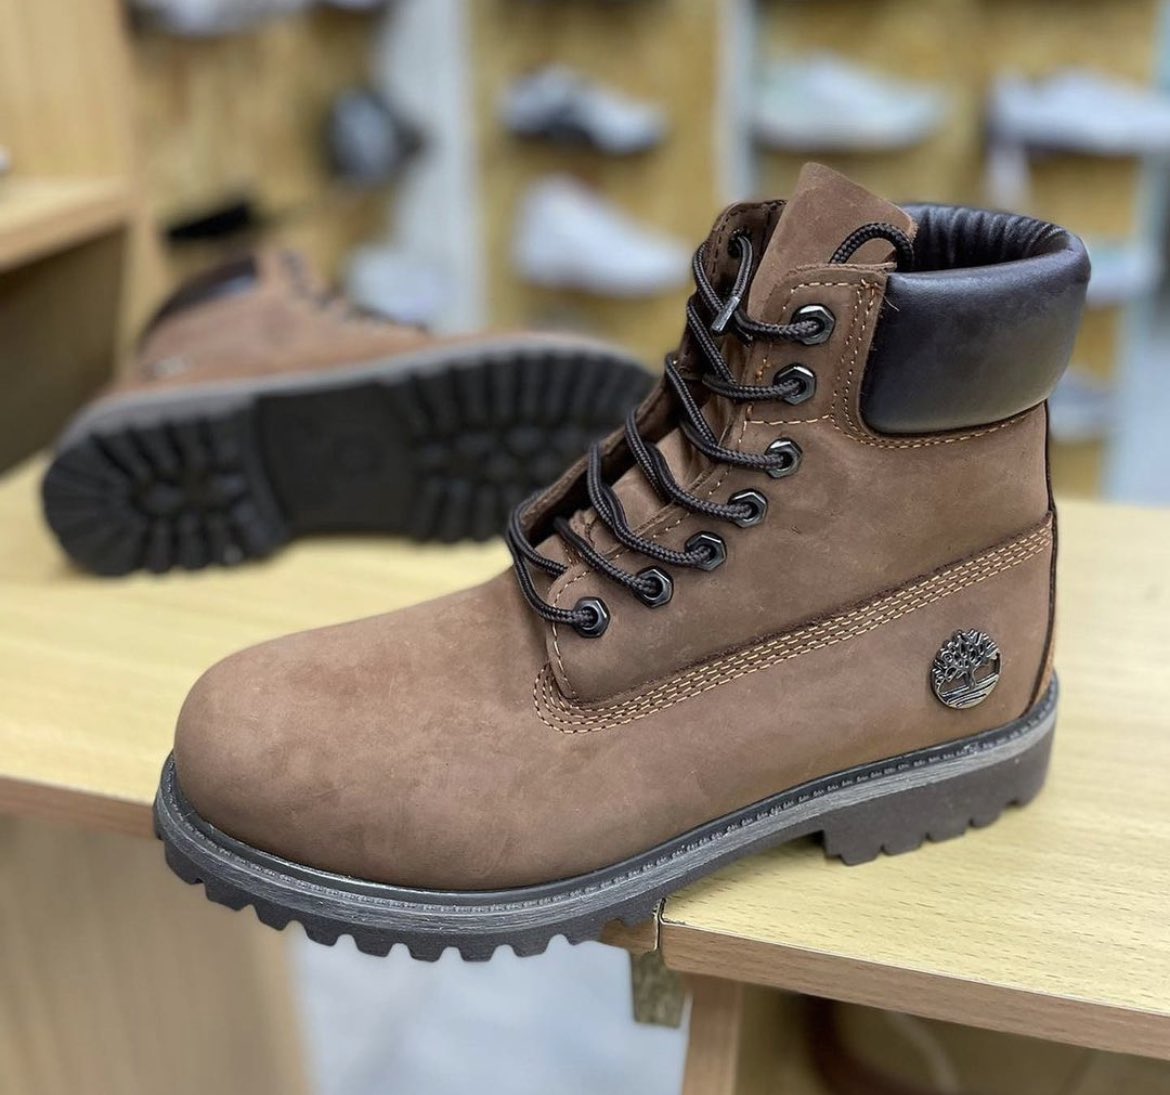 Naberz on Twitter: "All kinds of good👌 quality Timberland boots are available in store at 185000ugx At and affordable prices🔥 Dm or whatsApp on +256 751902113 deliveries 📦 🚚 #NaberzShoes